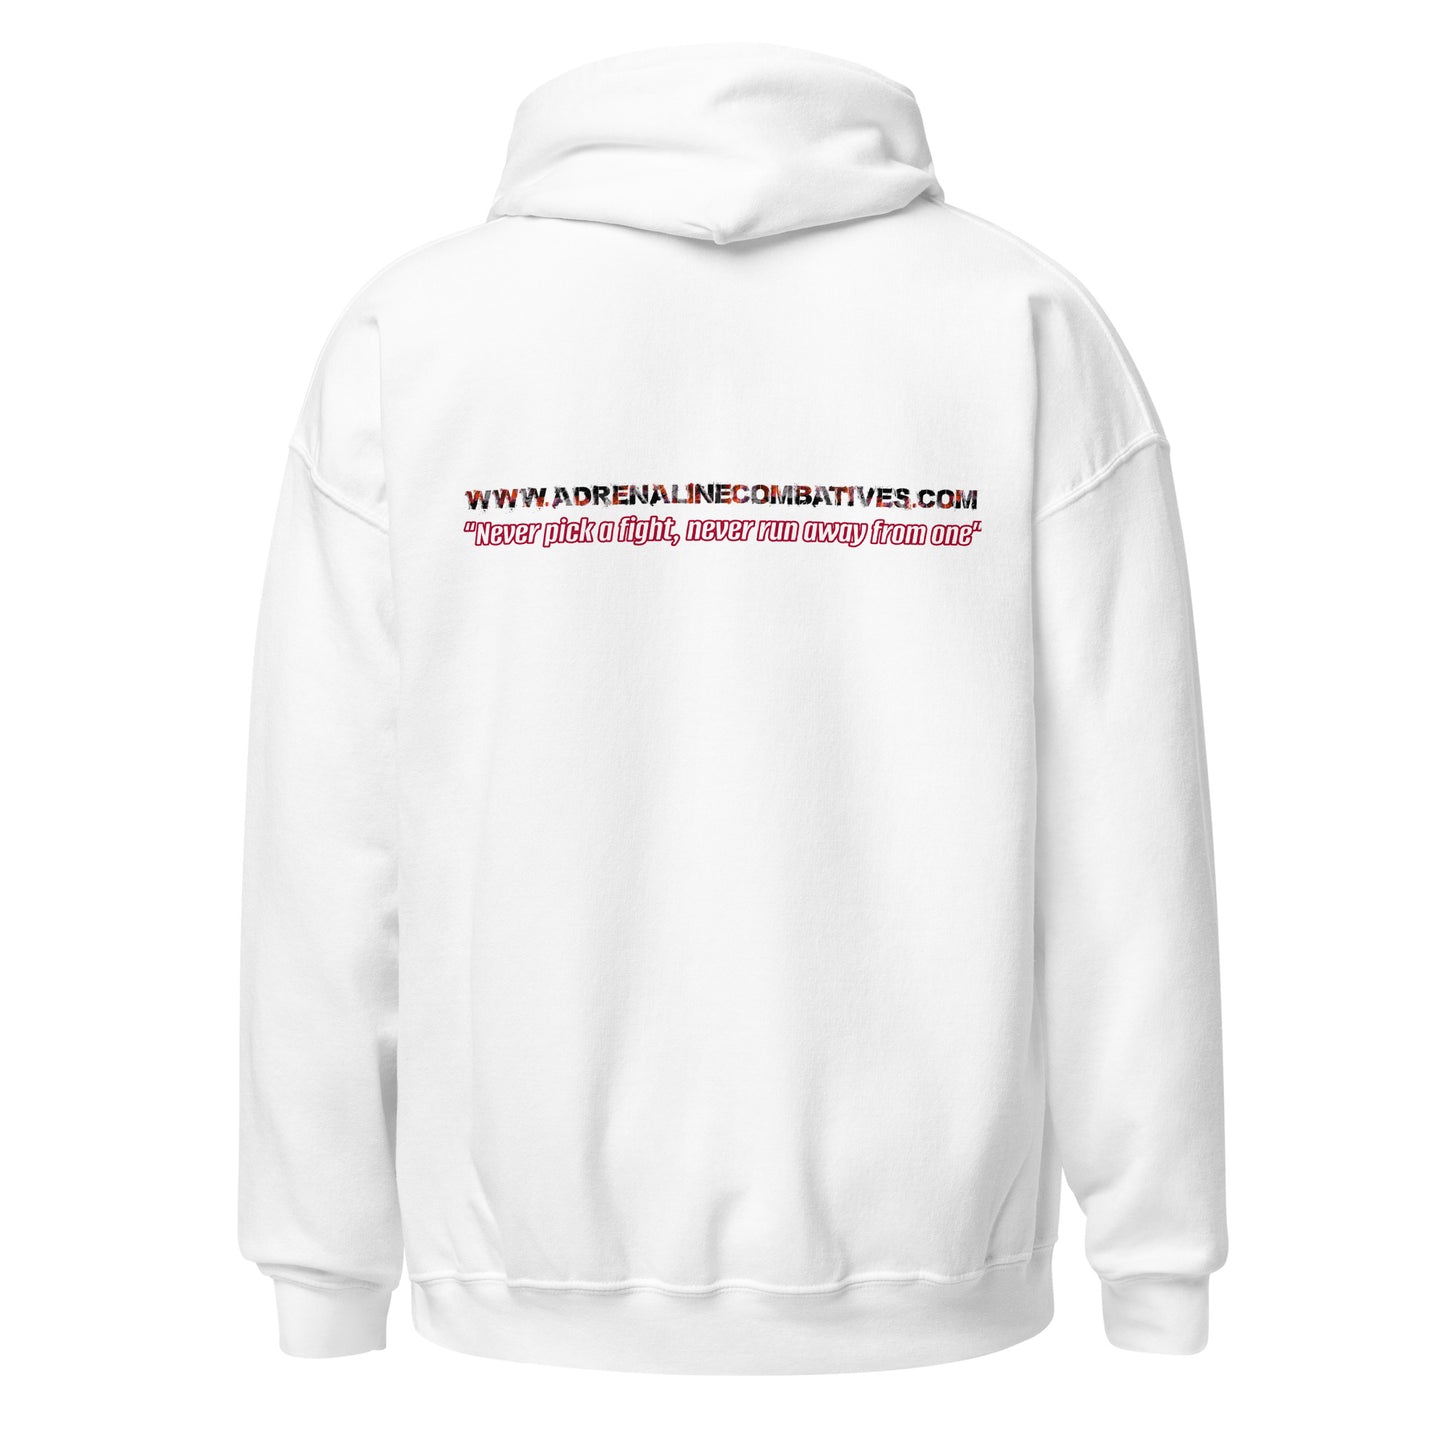 Unisex Hoodie - Adrenaline Combatives - Quote: “Never pick a fight, never run away from one”